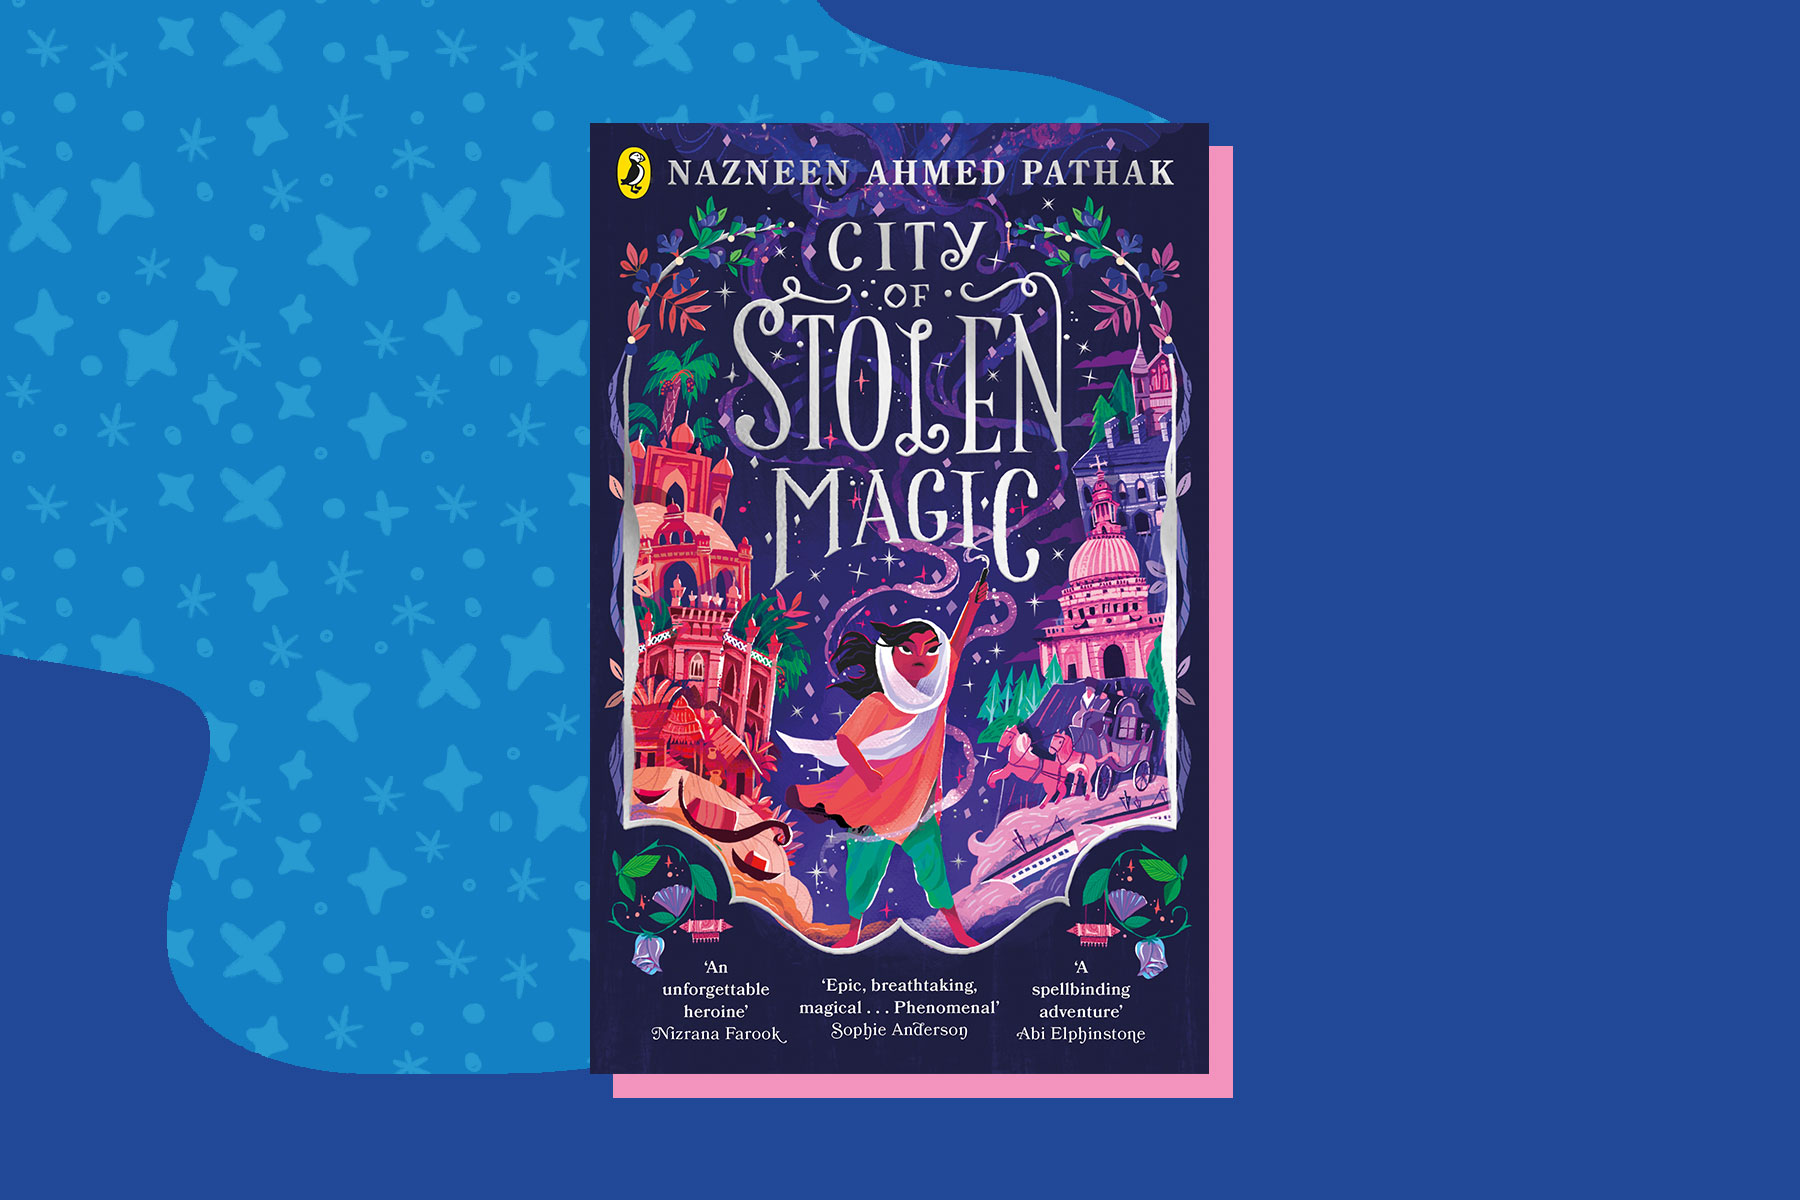 The story behind 'City of Stolen Magic'